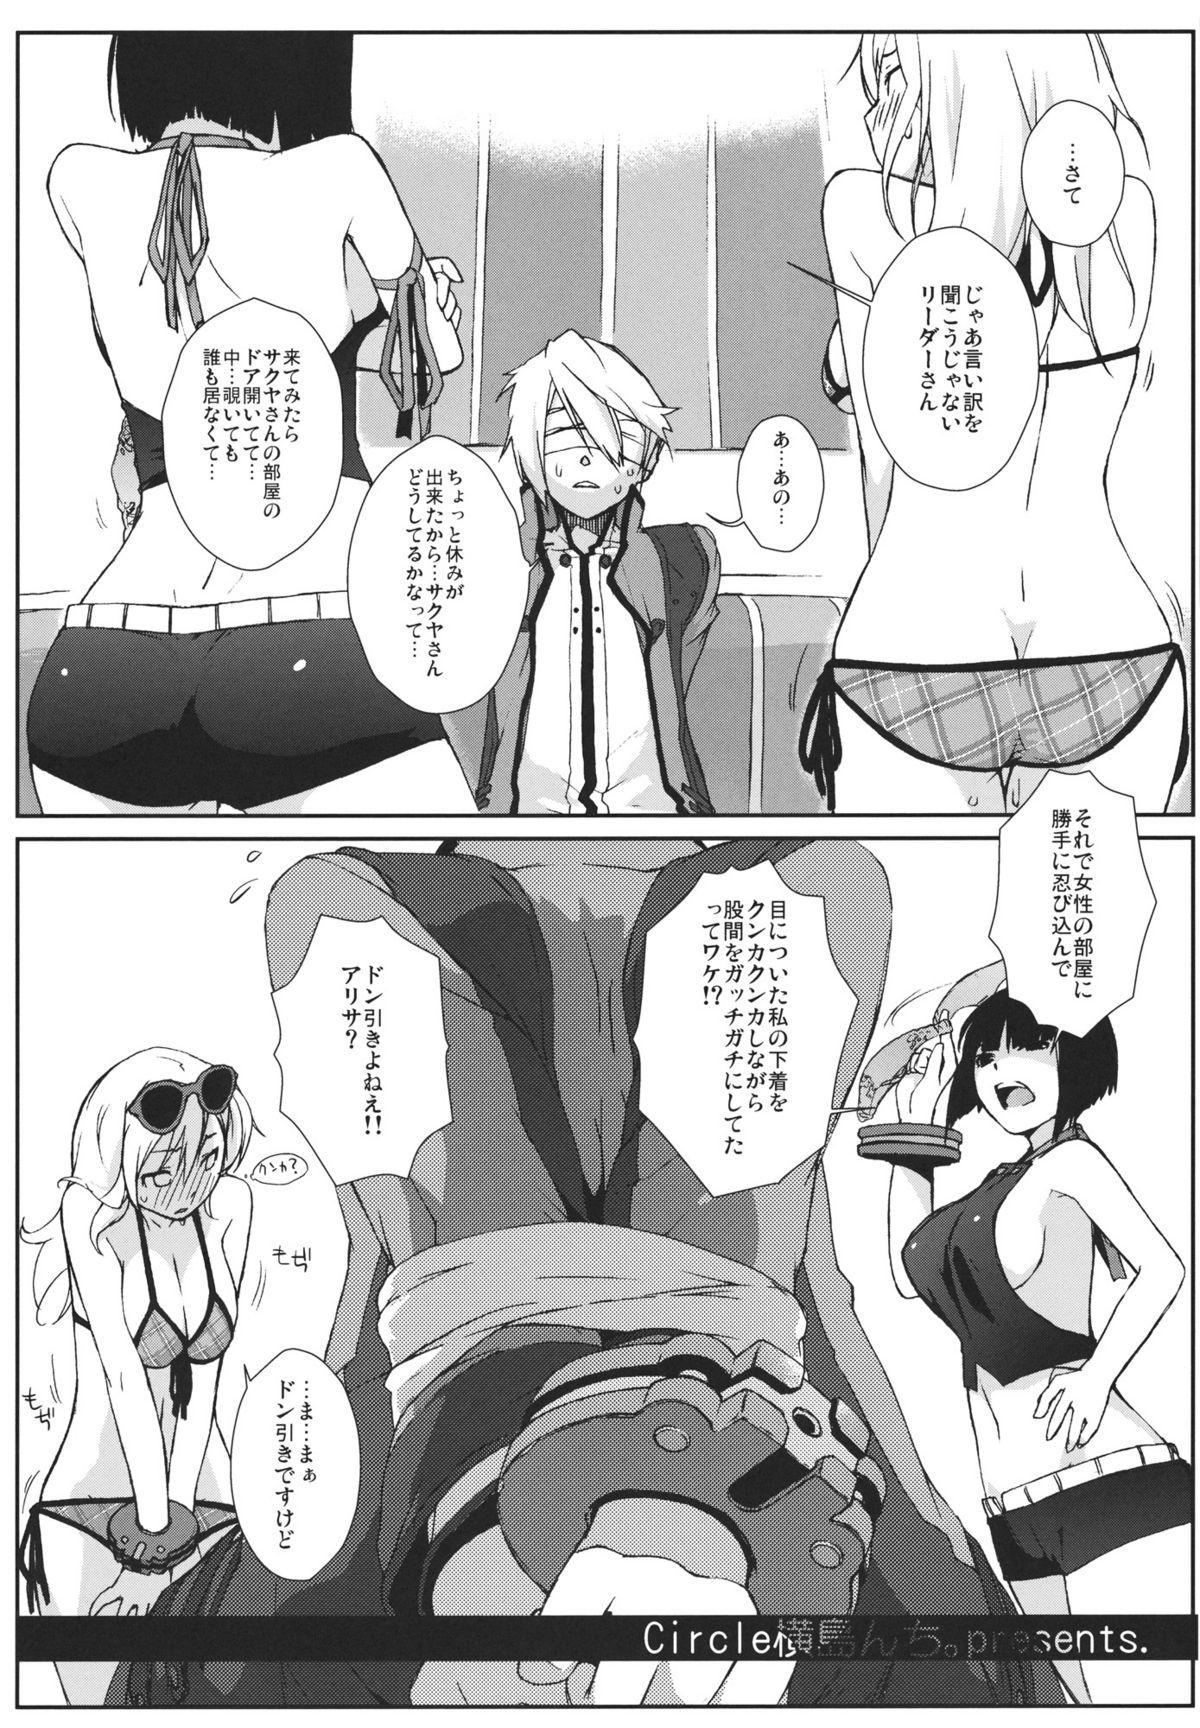 New PLAYTHING 2.0 - God eater Jerk - Page 4